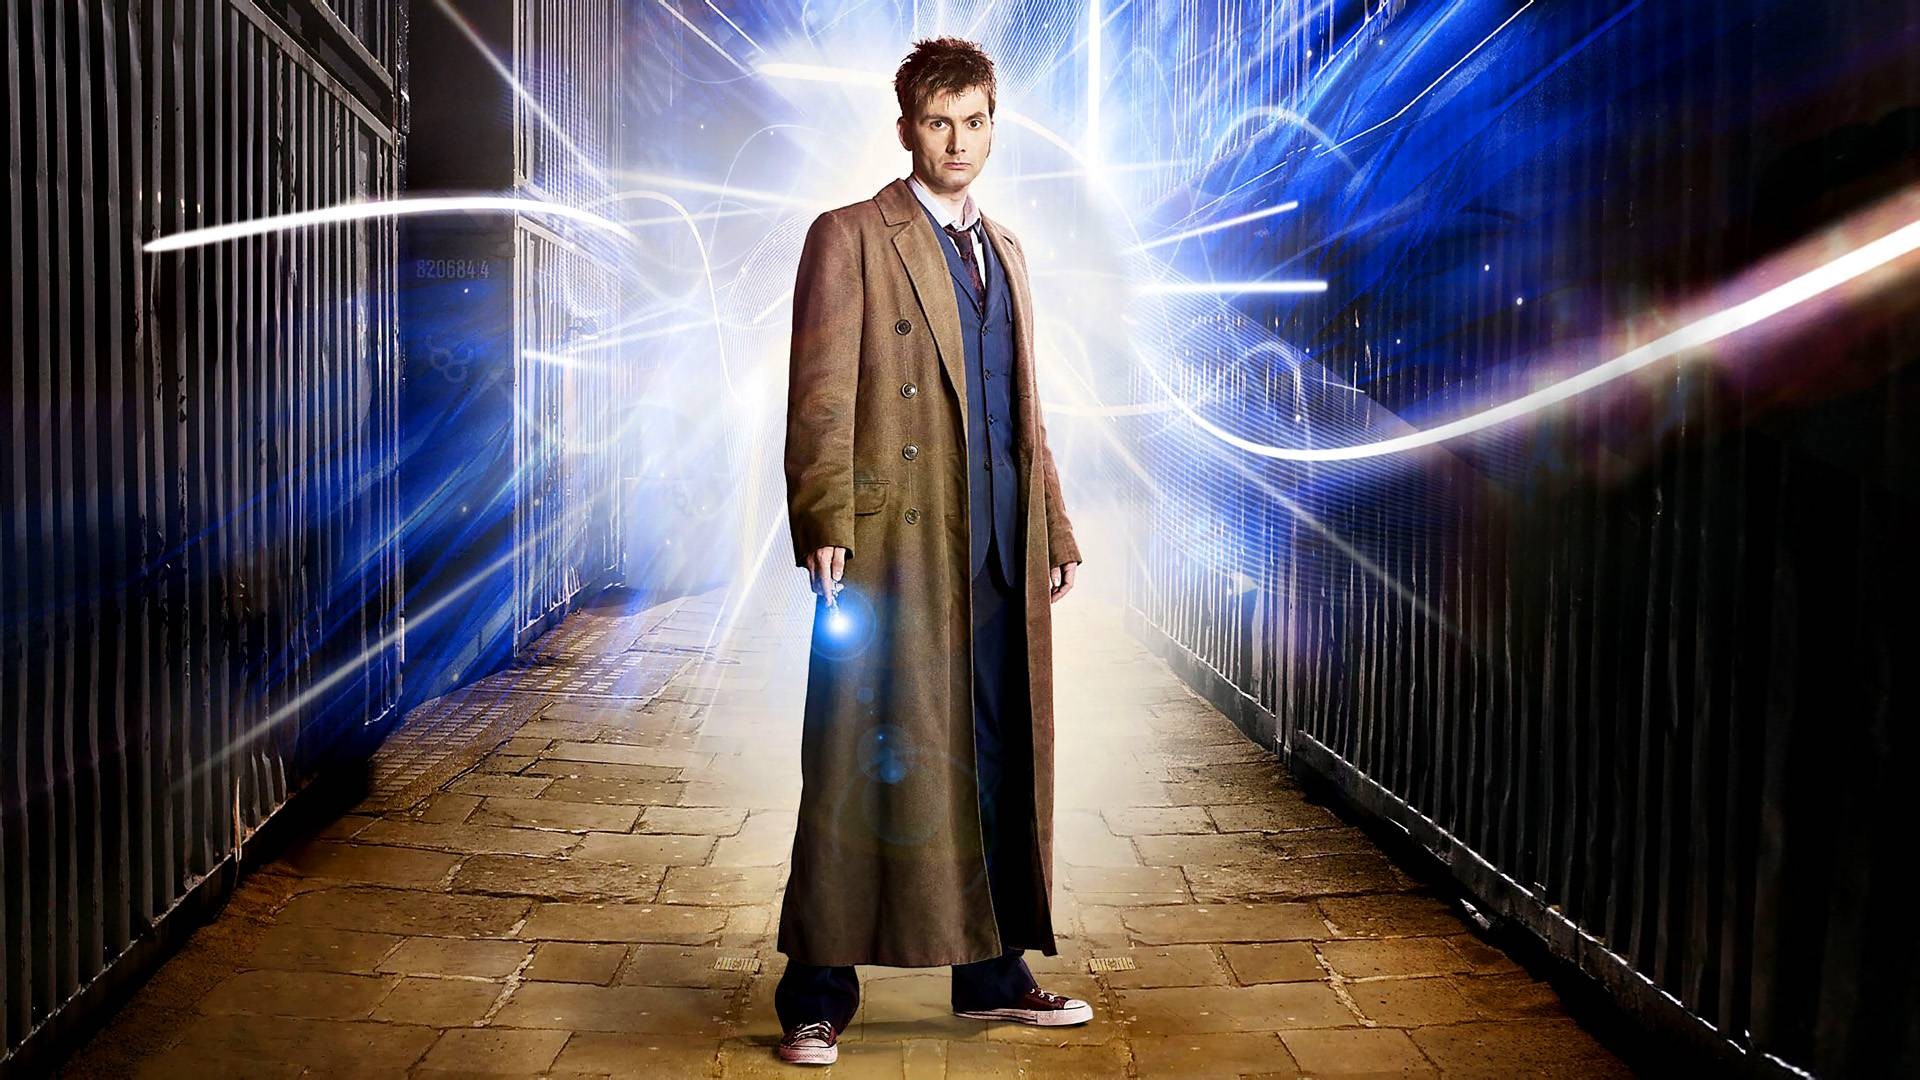 Doctor Who The Doctor TARDiS David Tennant Tenth Doctor 1920x1080